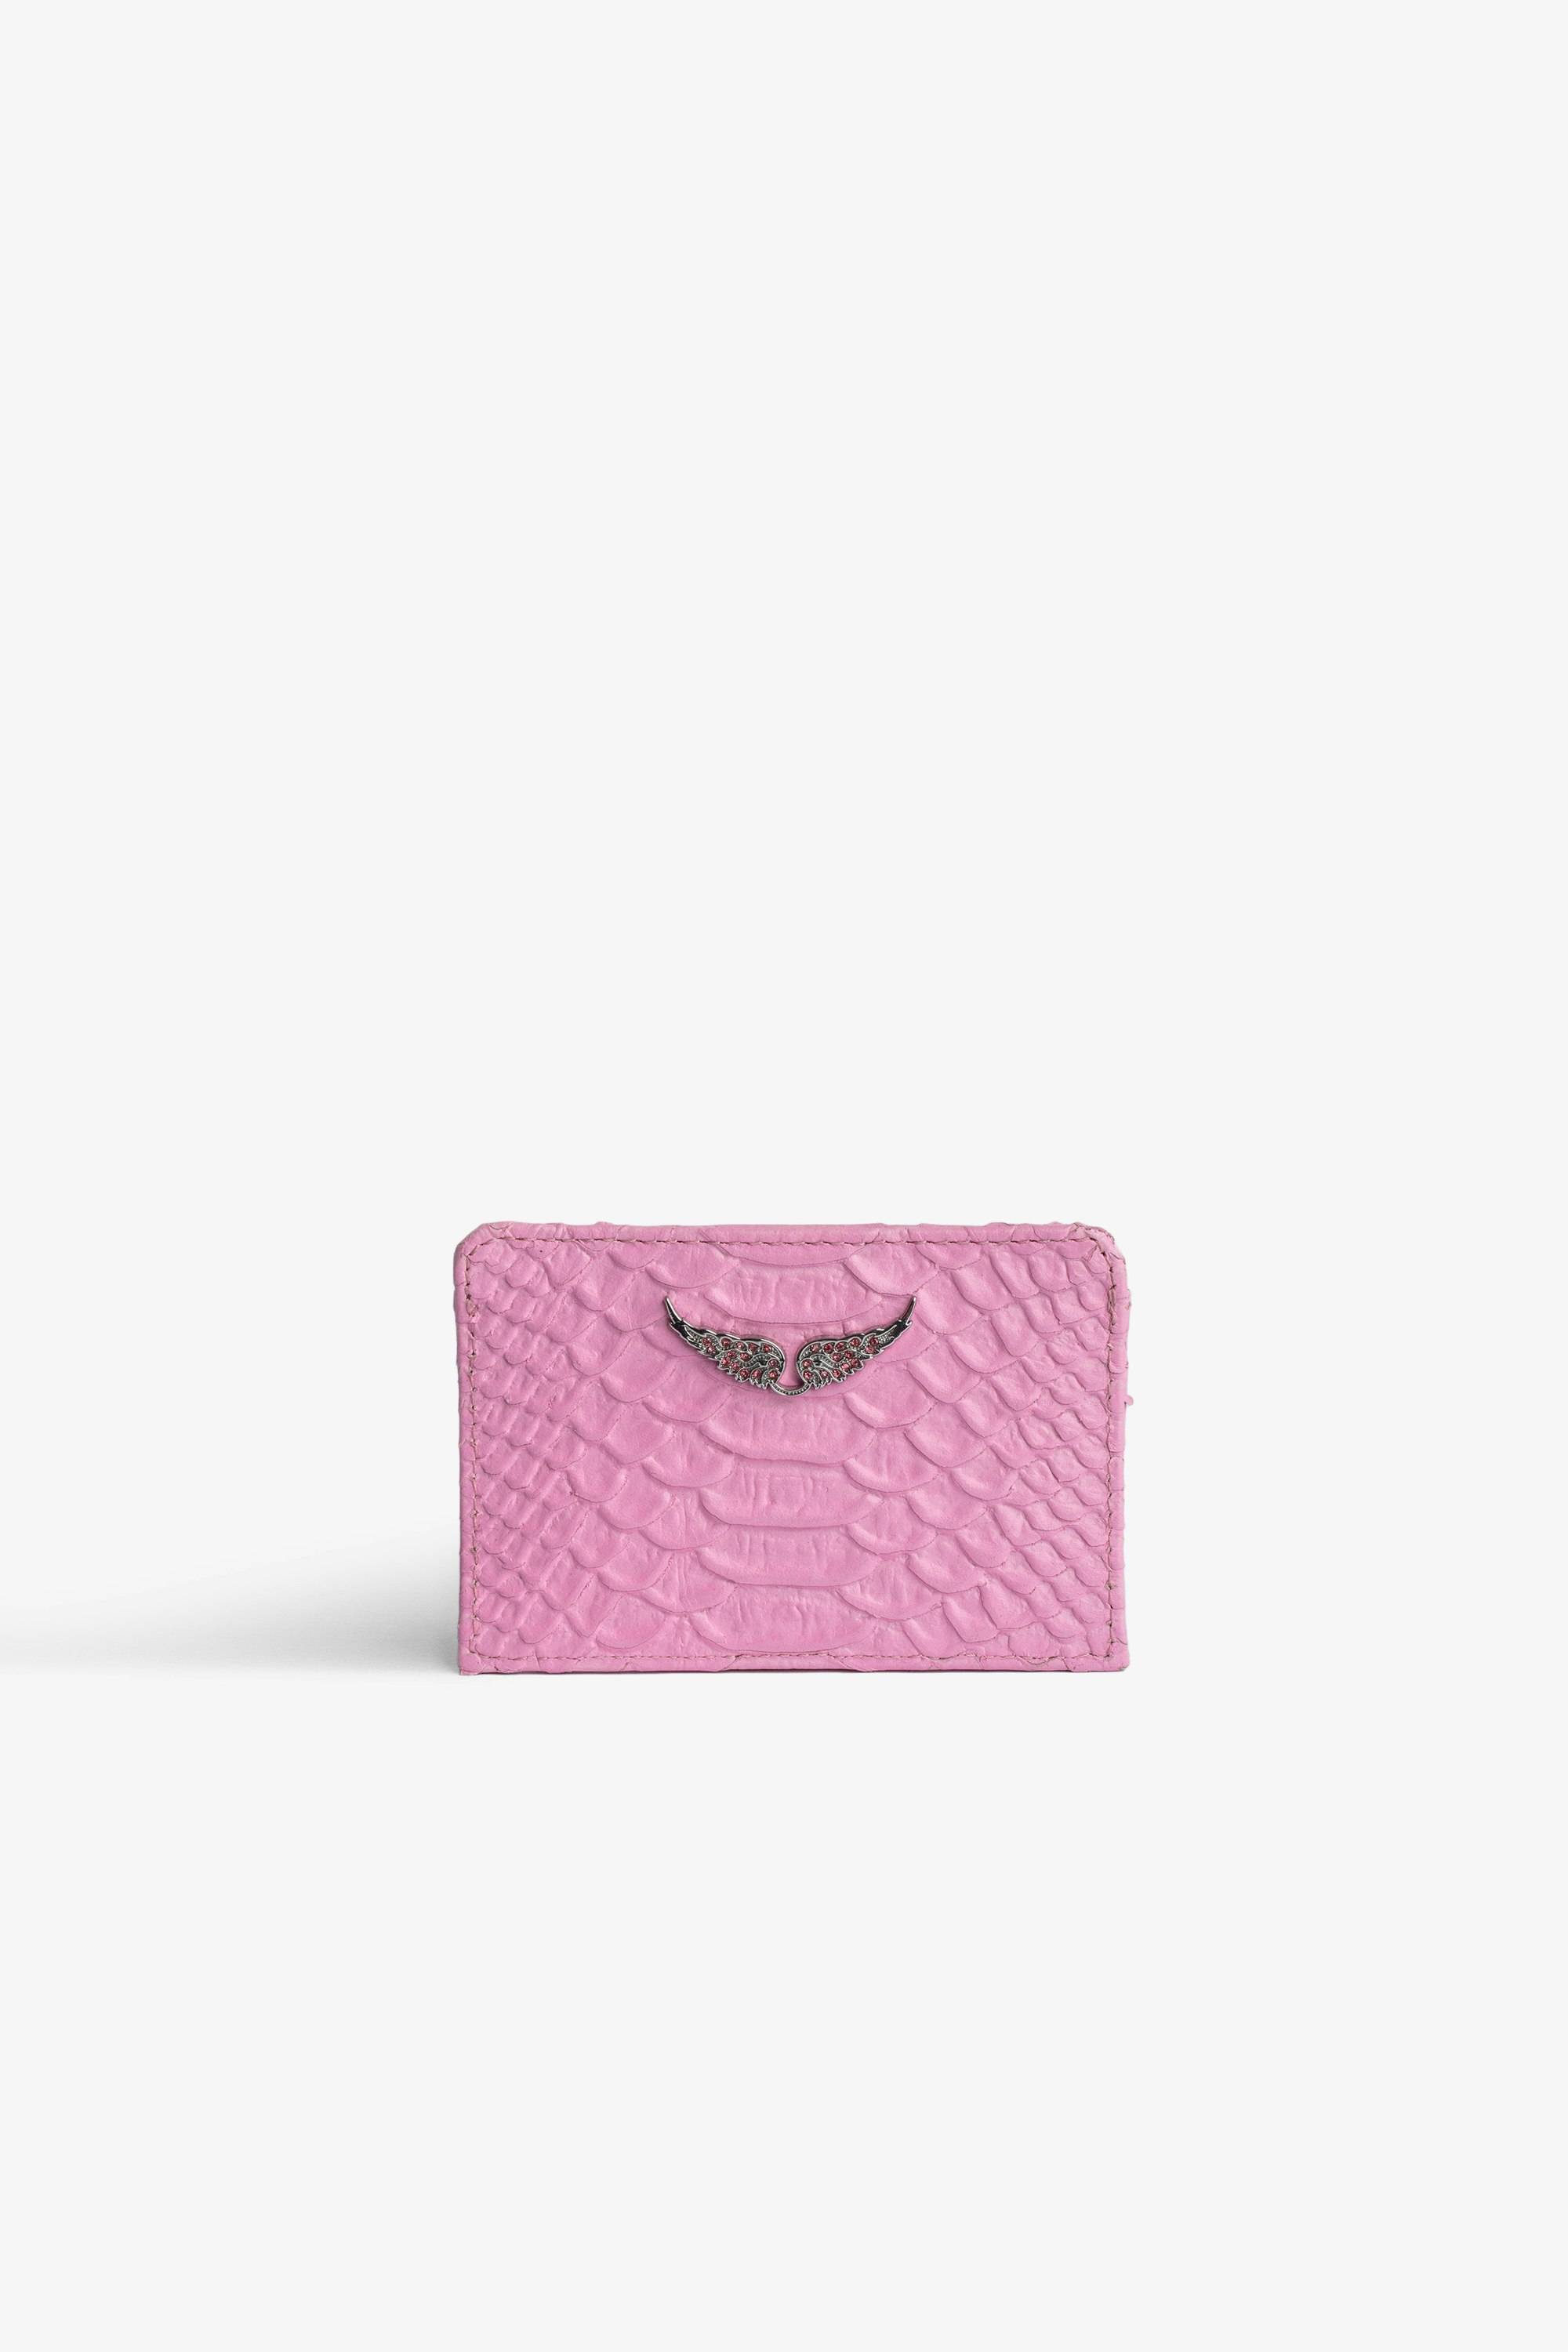 ZV Pass Savage Card Holder Women’s card holder in pink snakeskin-effect leather